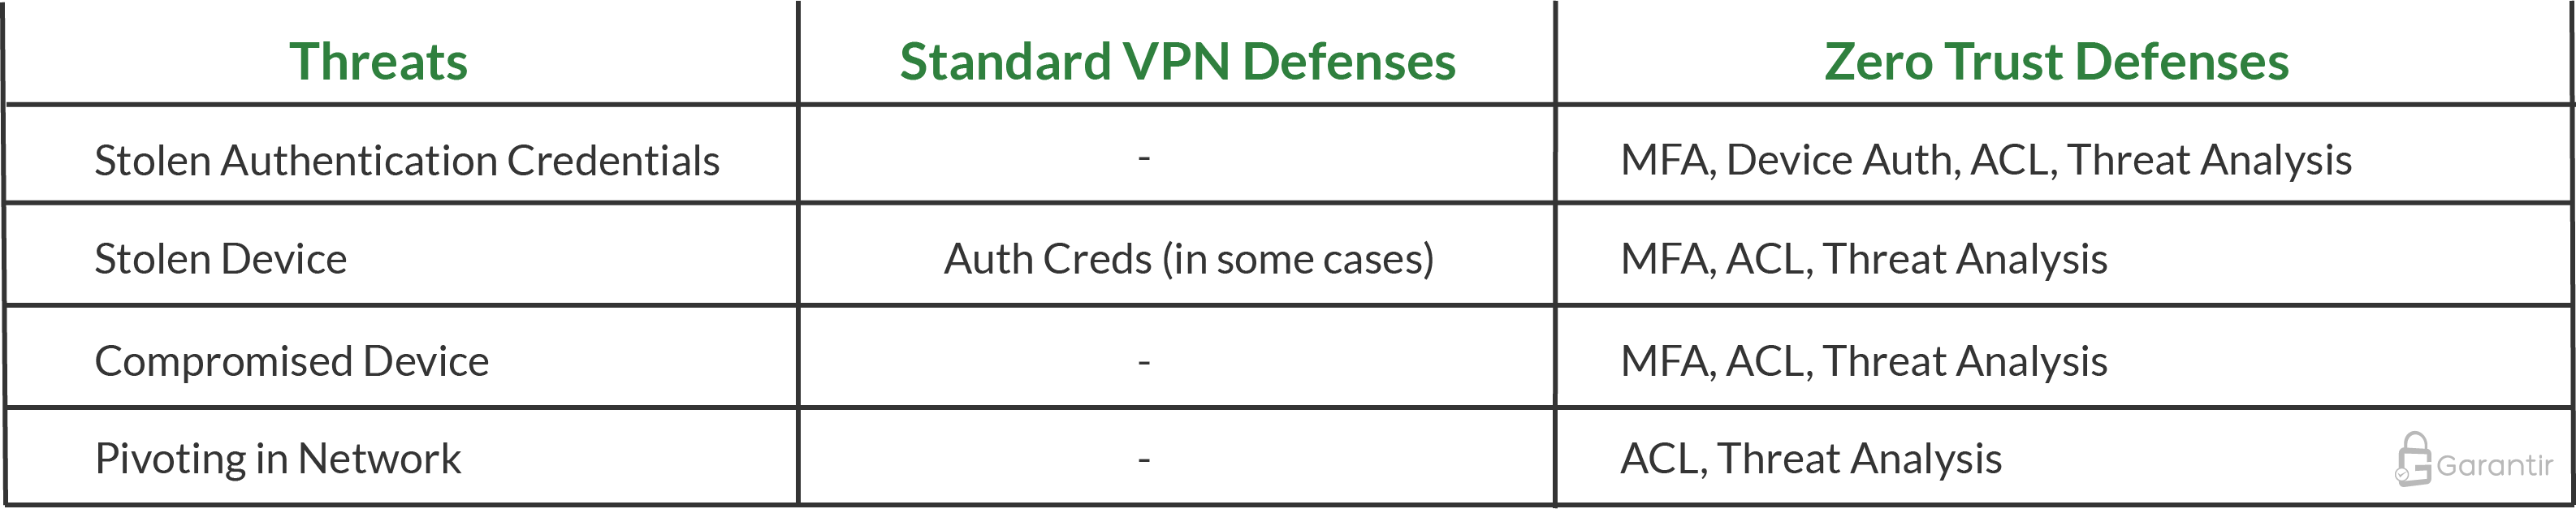 A table comparing the defenses of a standard VPN configuration to the defenses of a zero trust architecture.